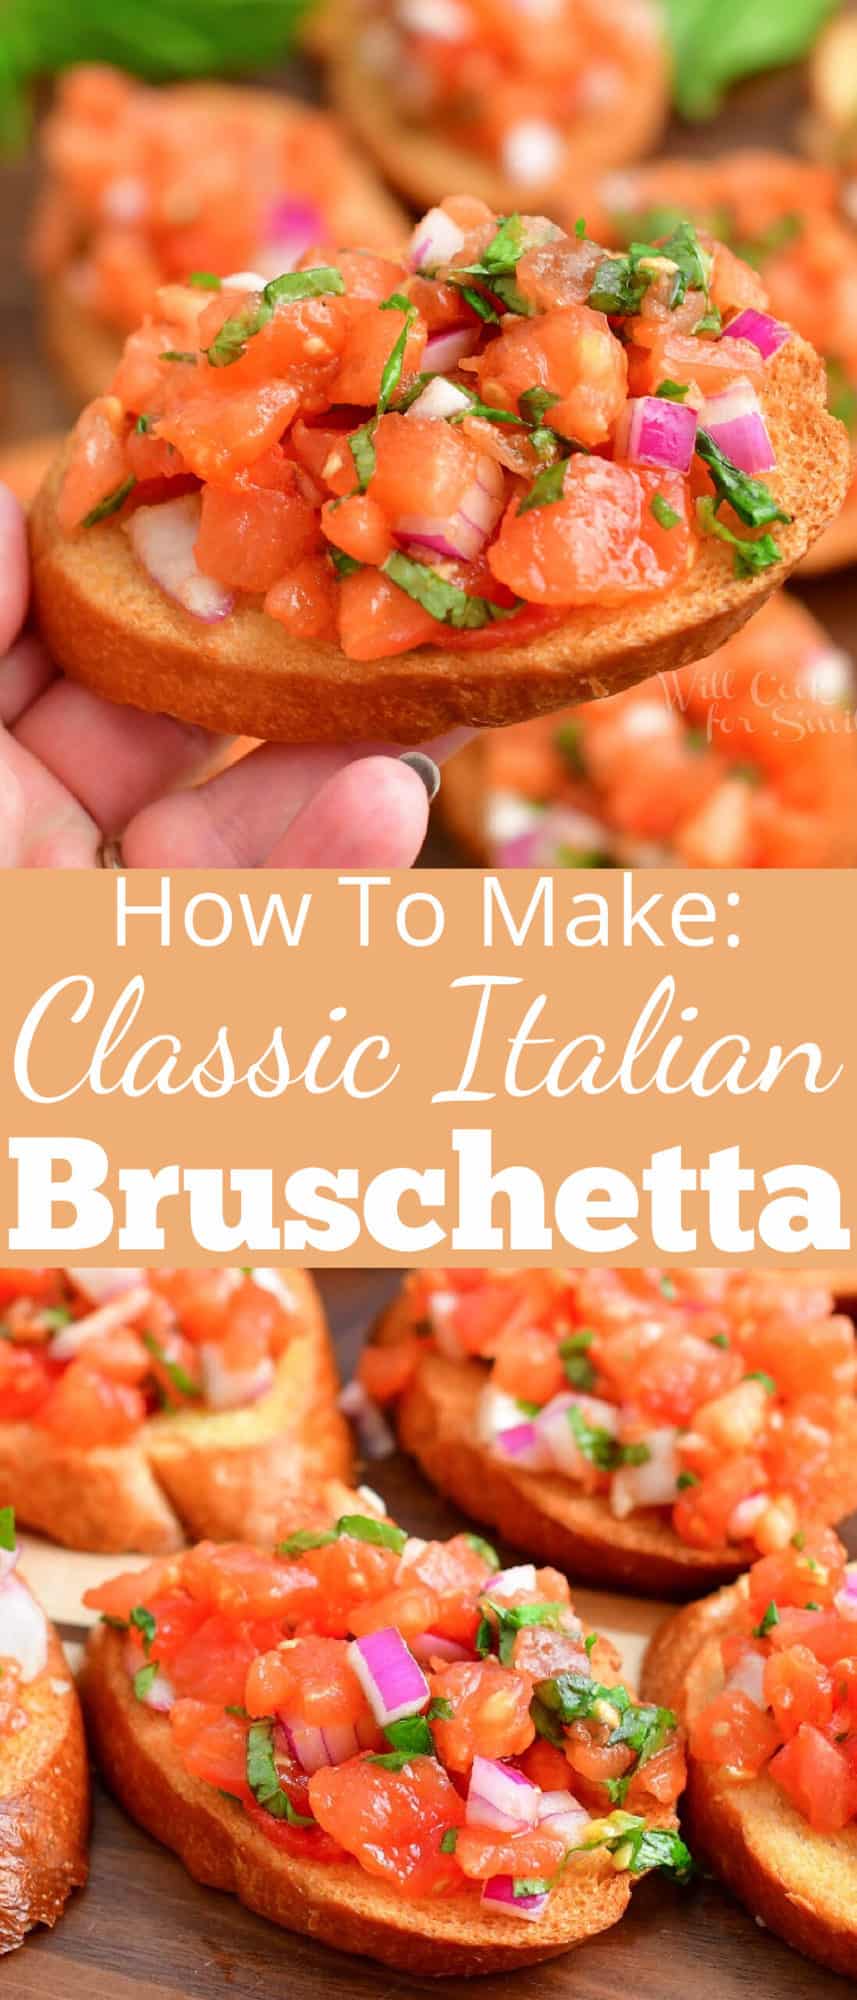 collage of two images of closeup bruschetta and title in the middle